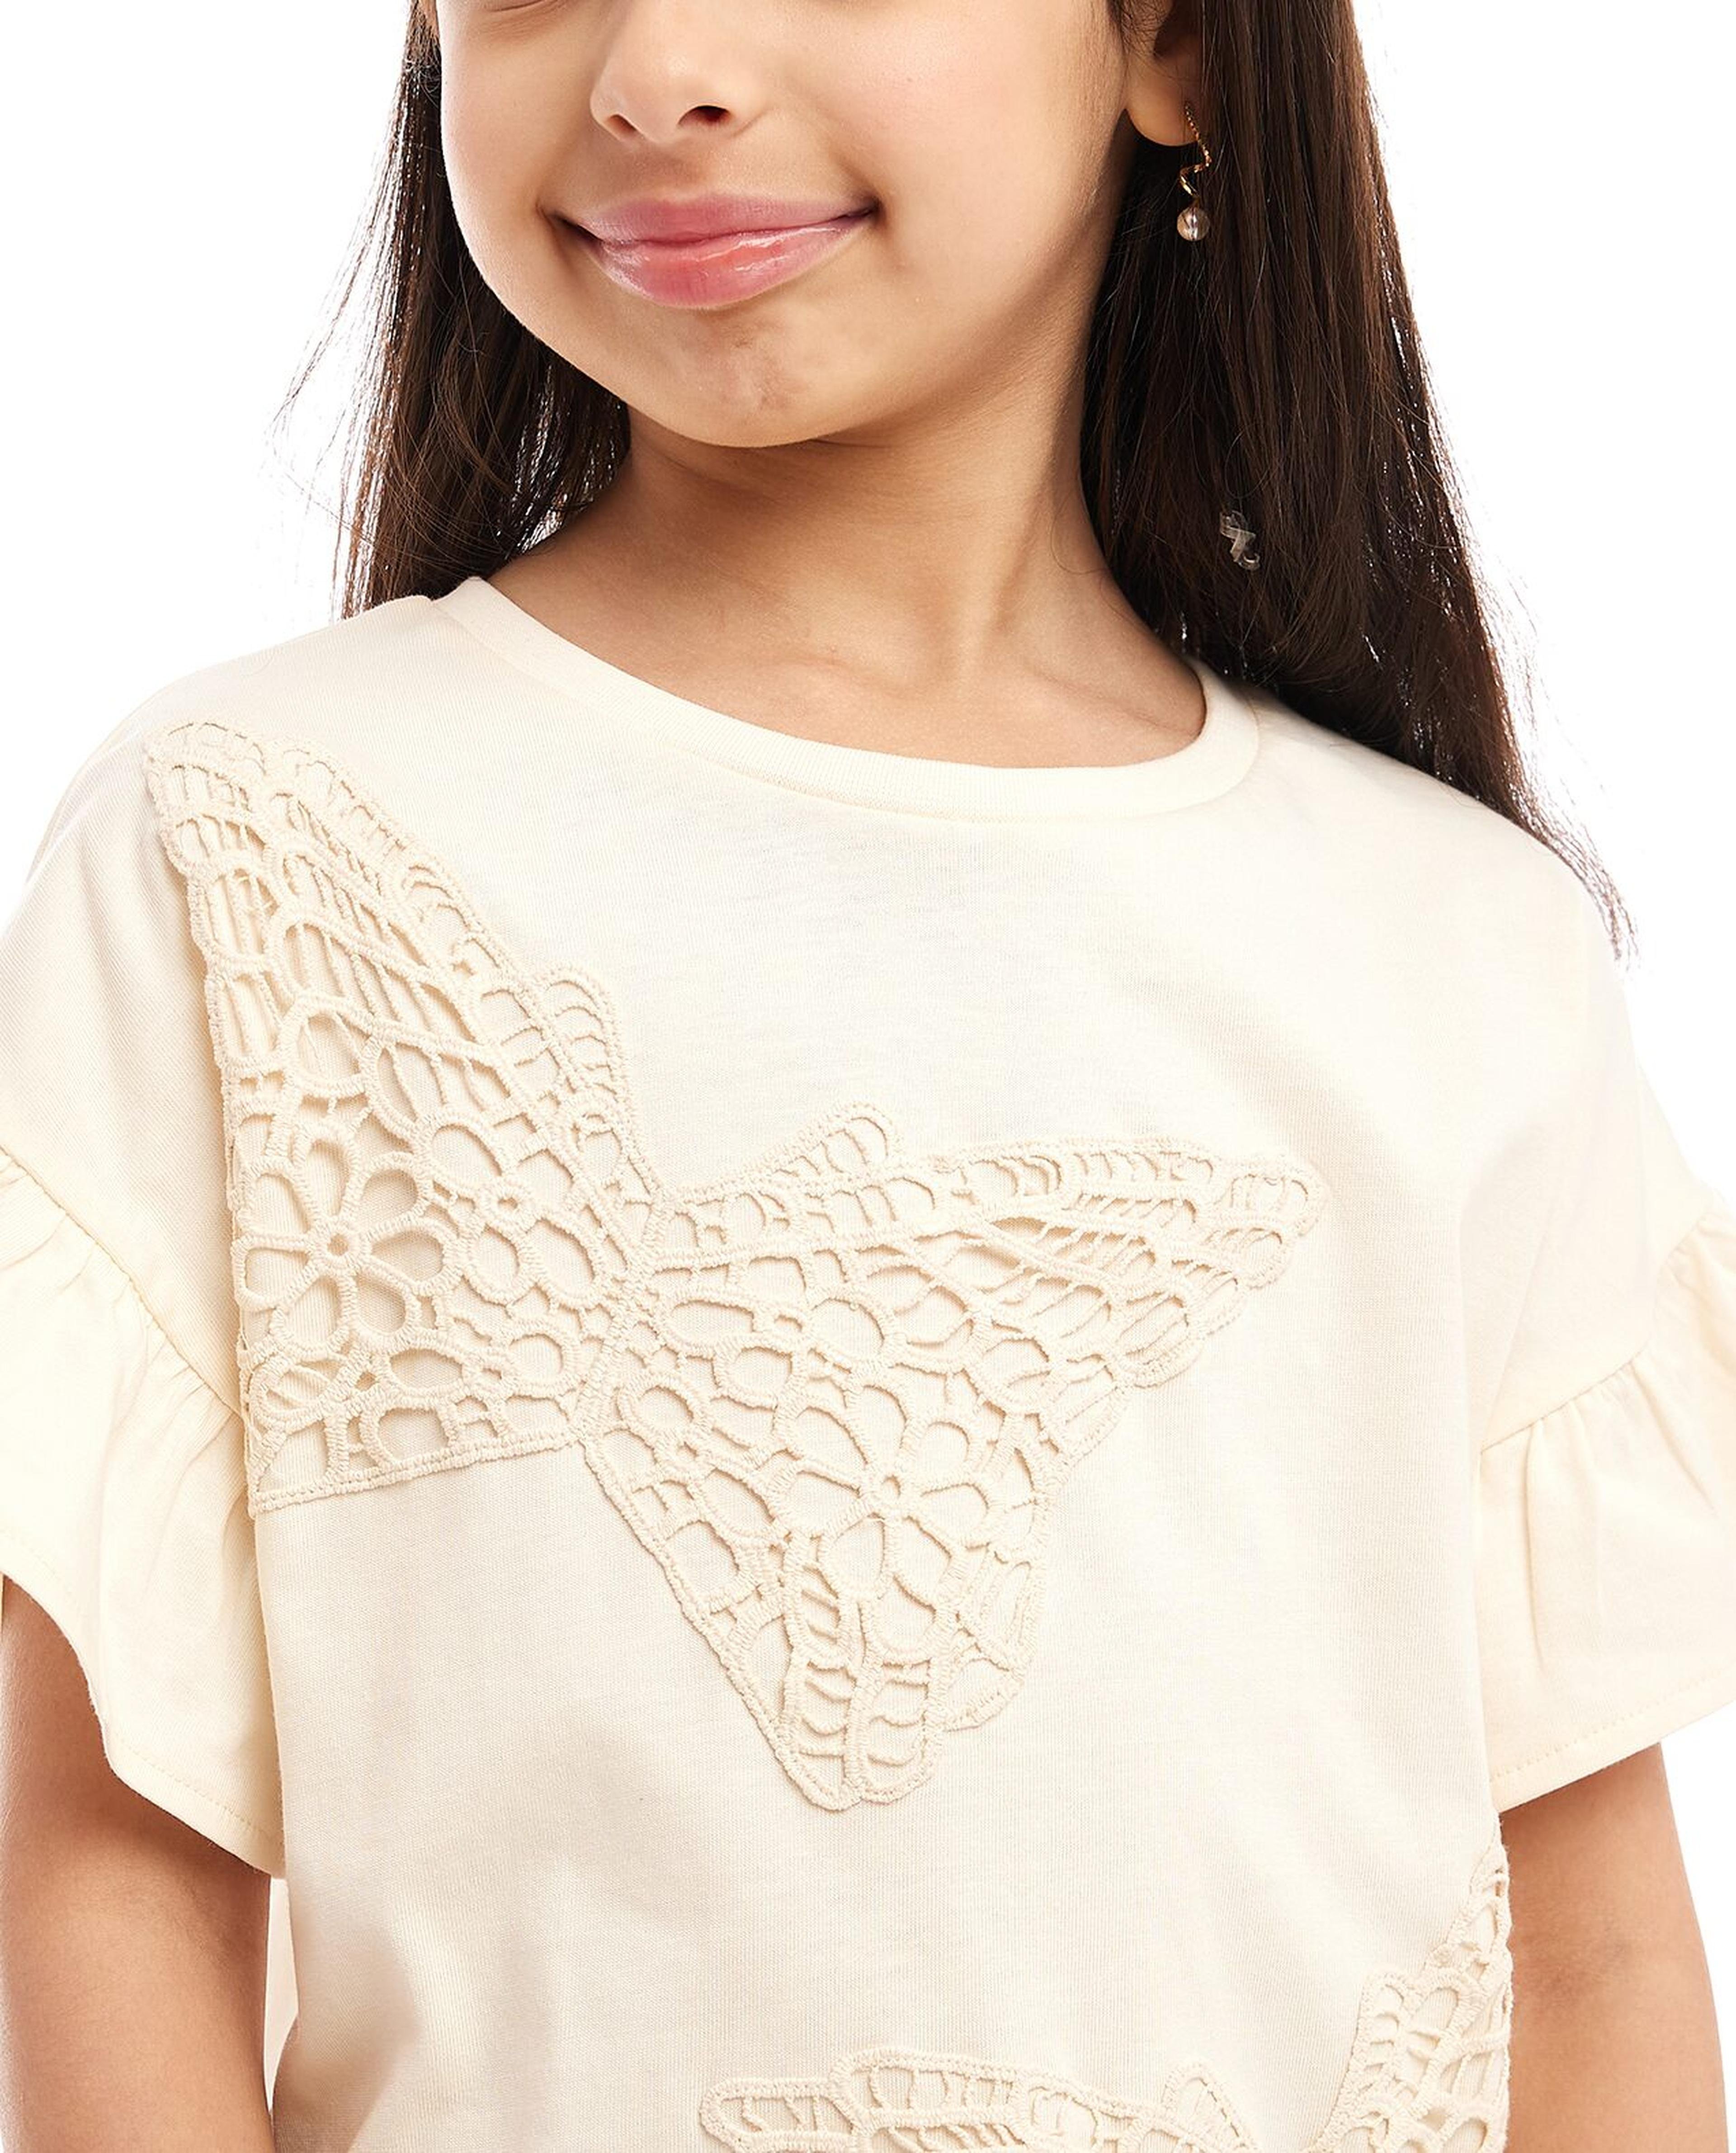 Cutwork Detail Top with Crew Neck and Short Sleeves